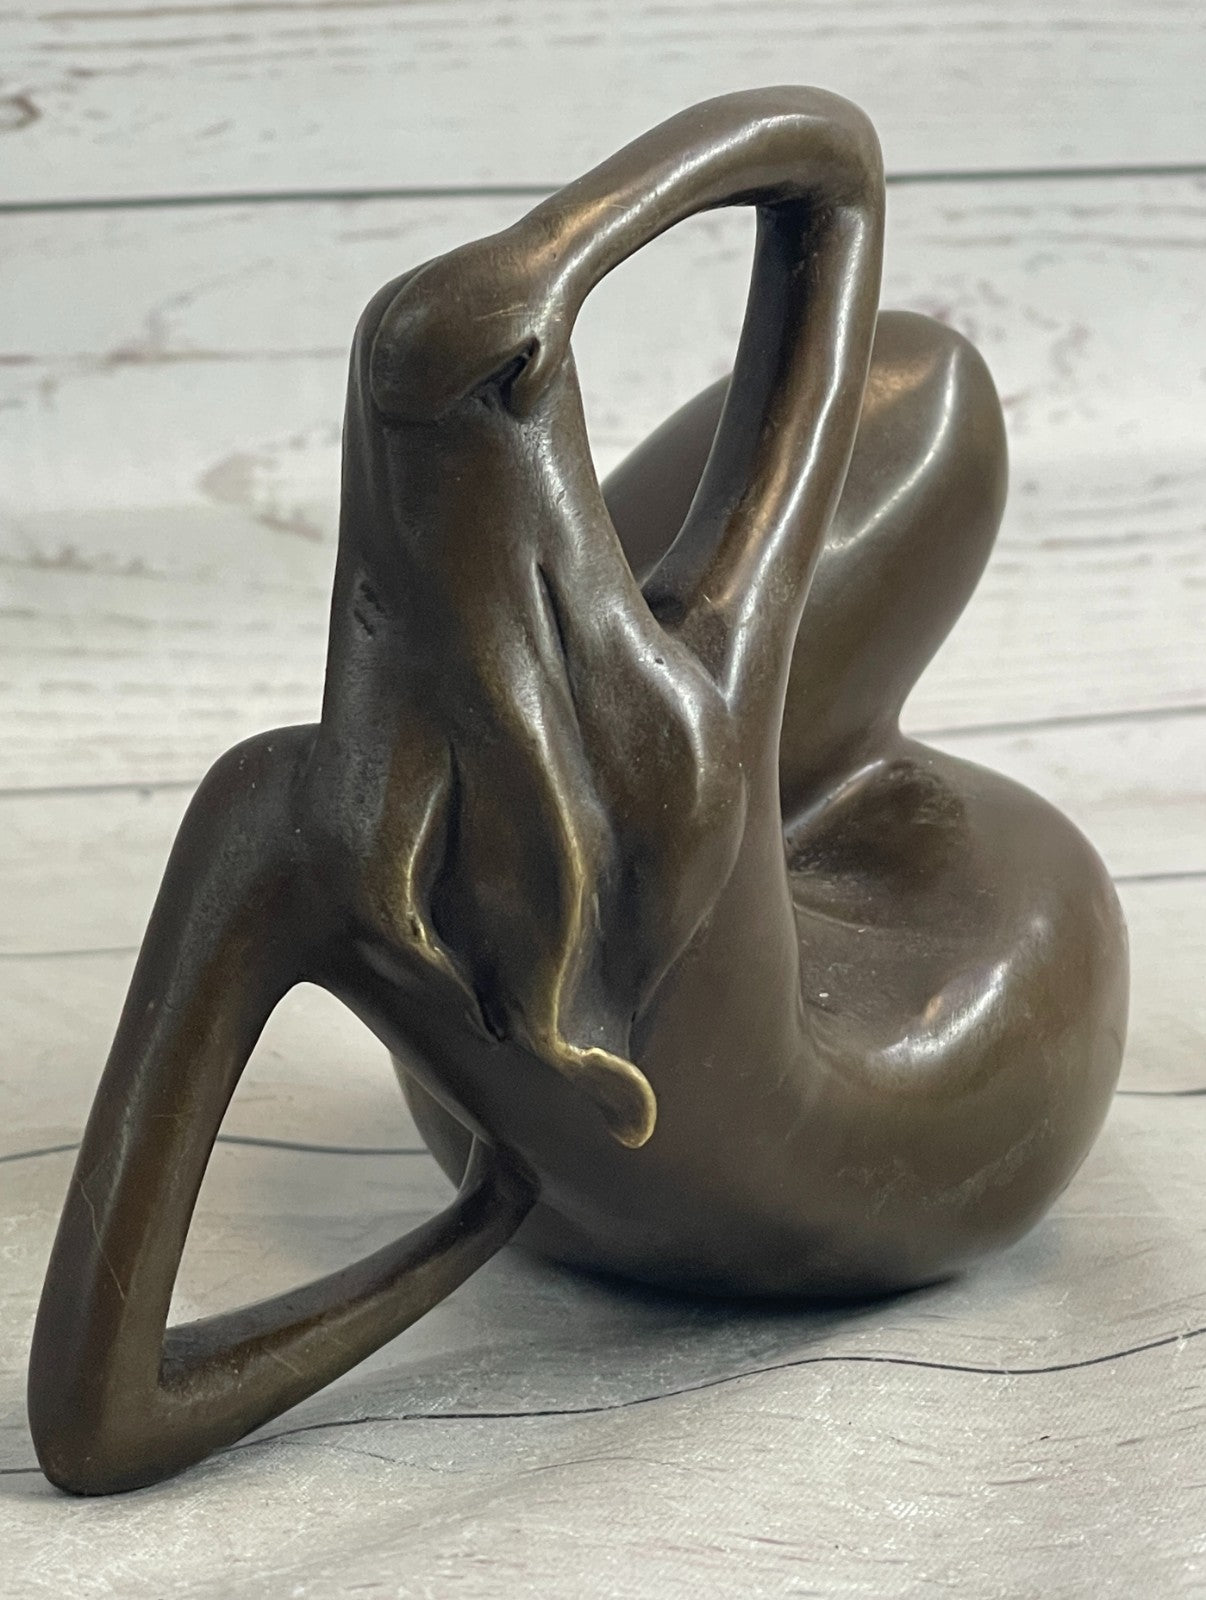 Exquisite Home Office Decor: Handmade Bronze Sculpture by Mario Nick, Classic Nude Woman